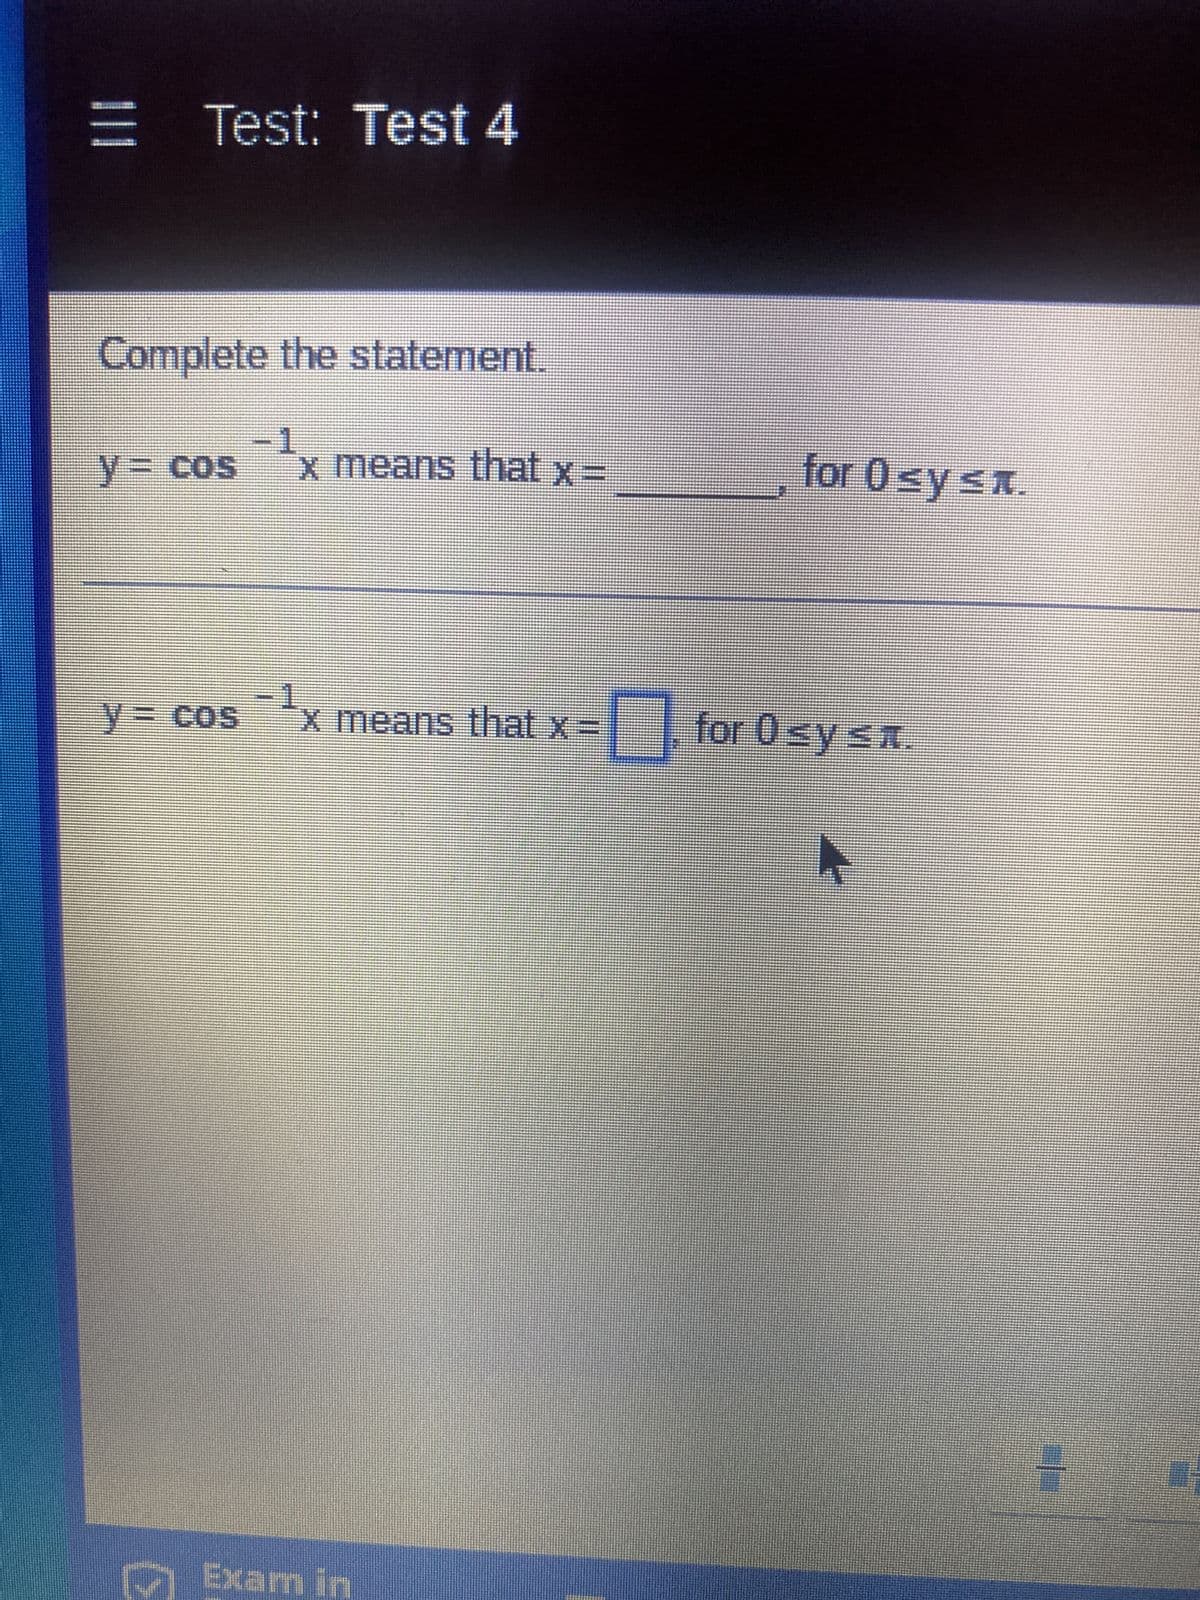 = Test: Test 4
Complete the statement.
y = cos
y = cos
1
x means that x =
for 0 ≤y ≤n.
x means that x= for 0<y sz
Exam in
+0